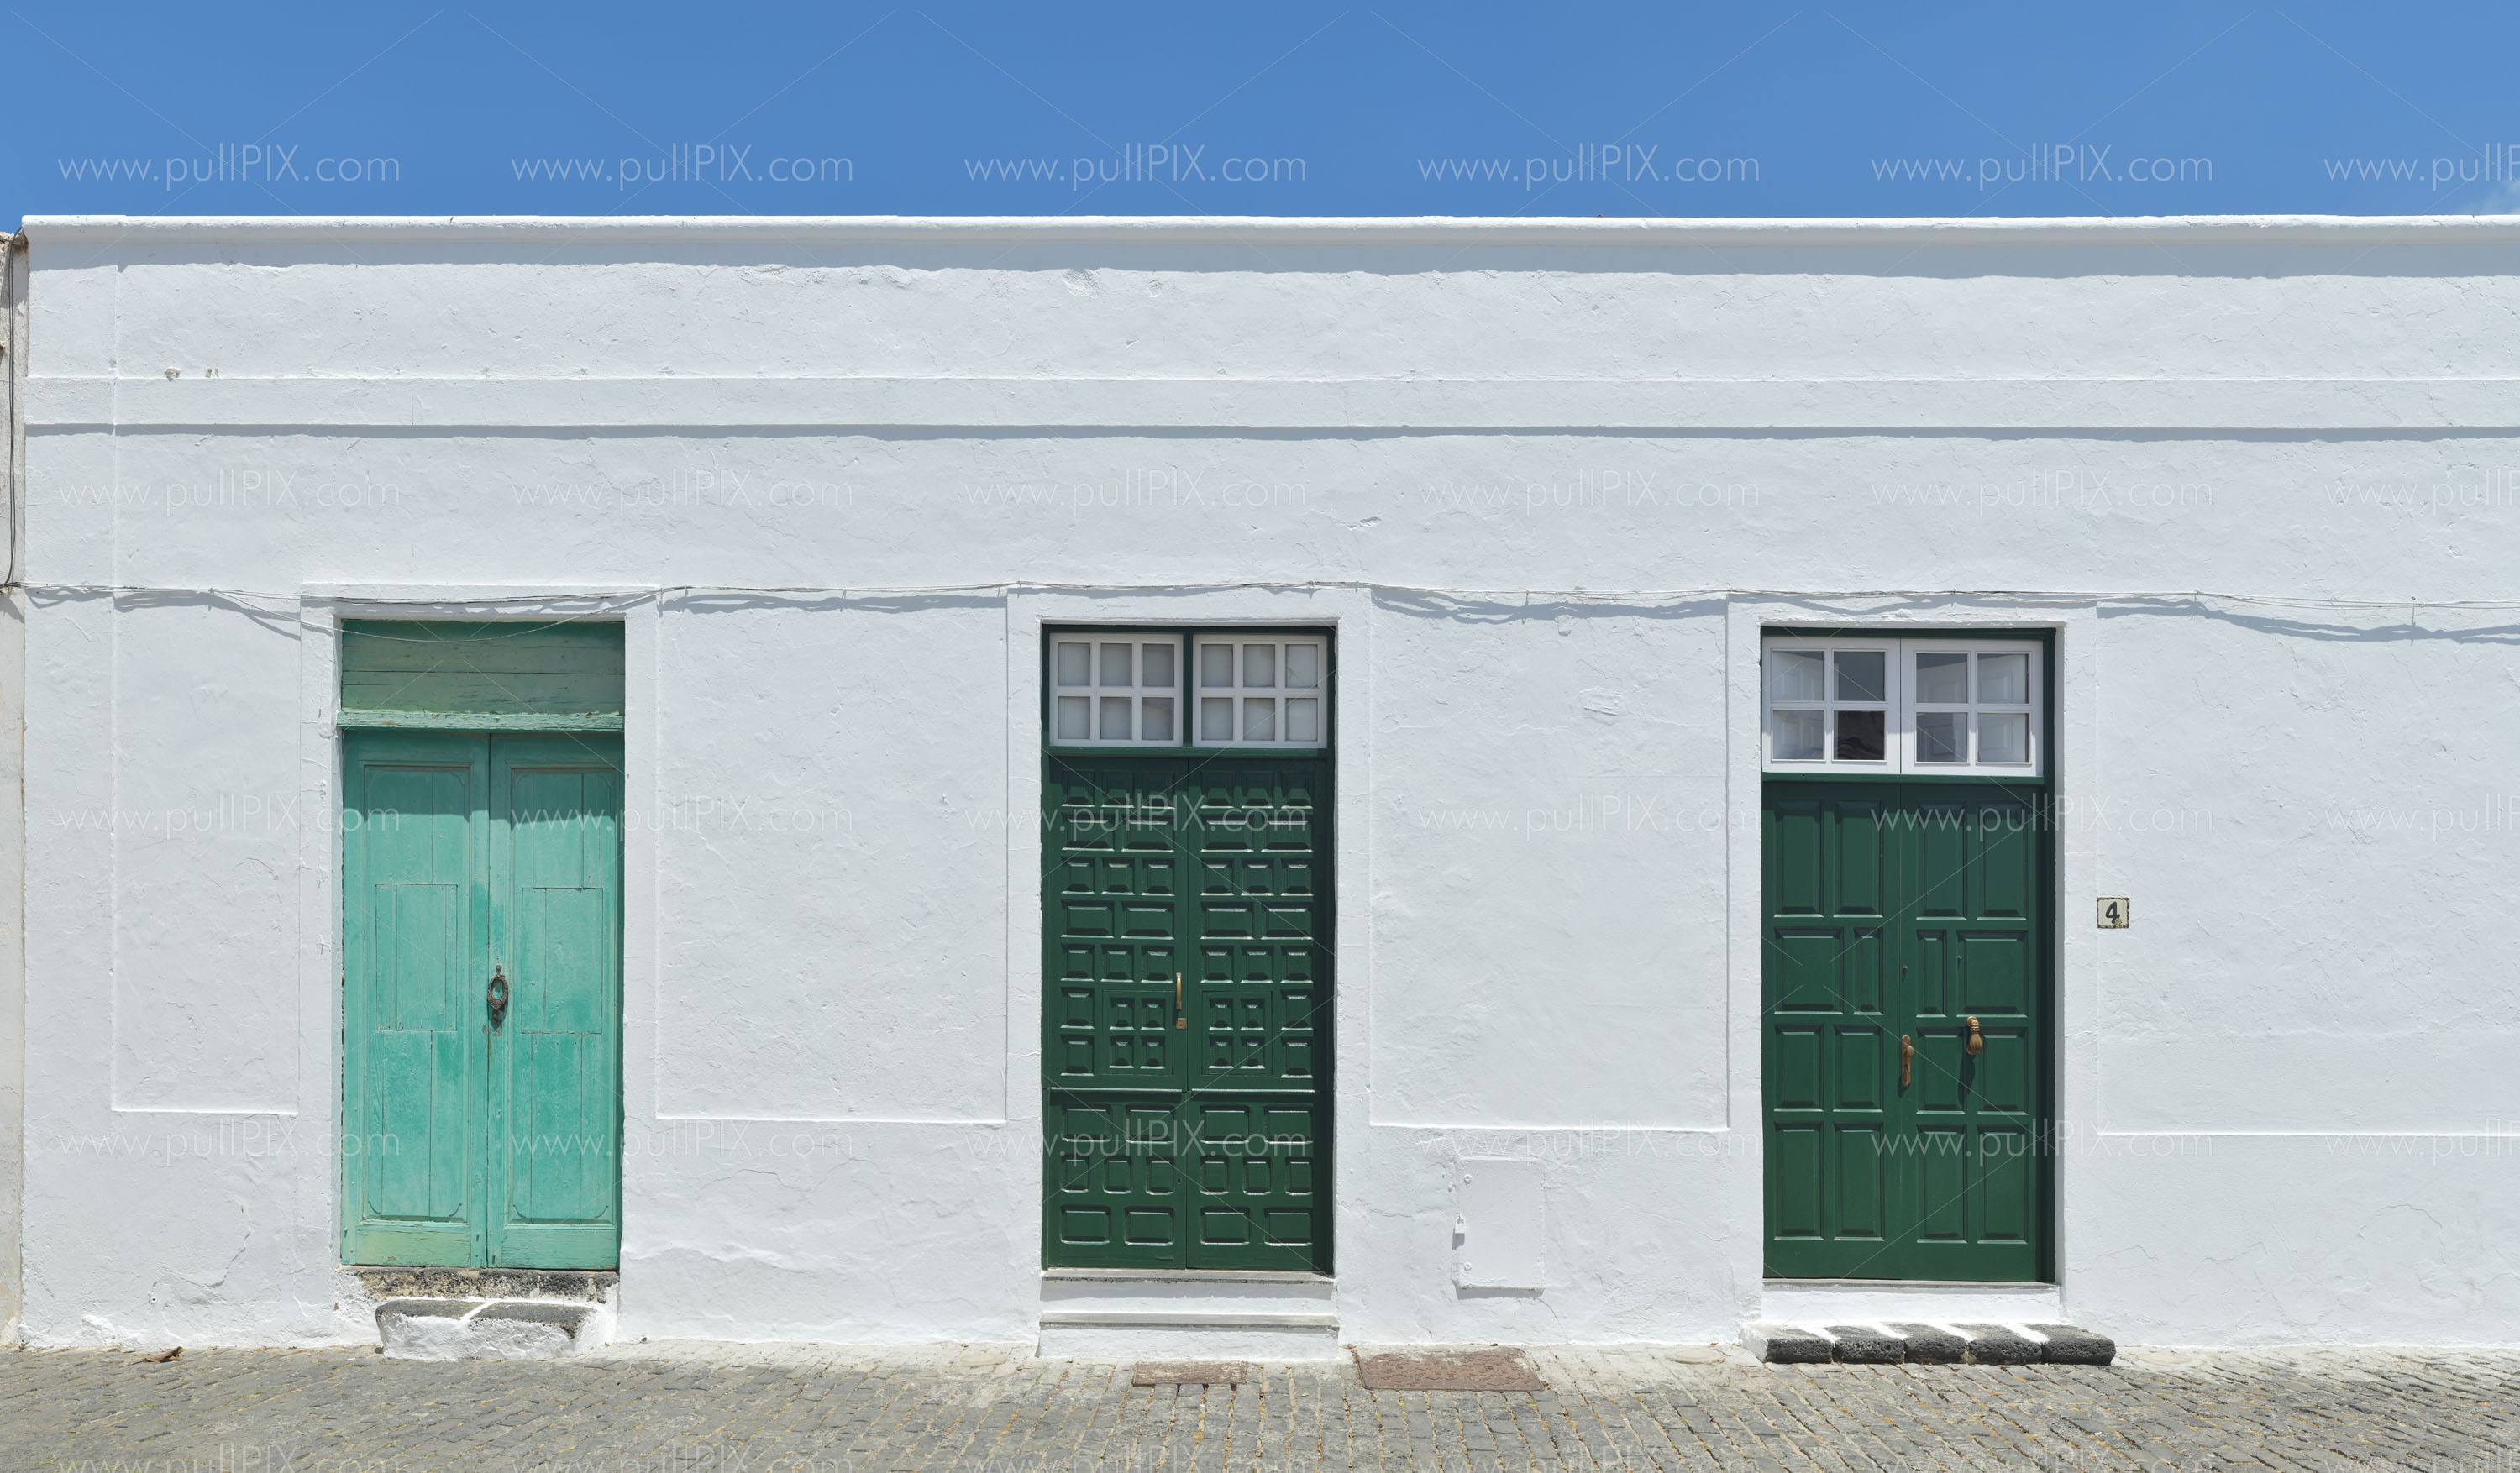 Preview Teguise Hauswand.jpg